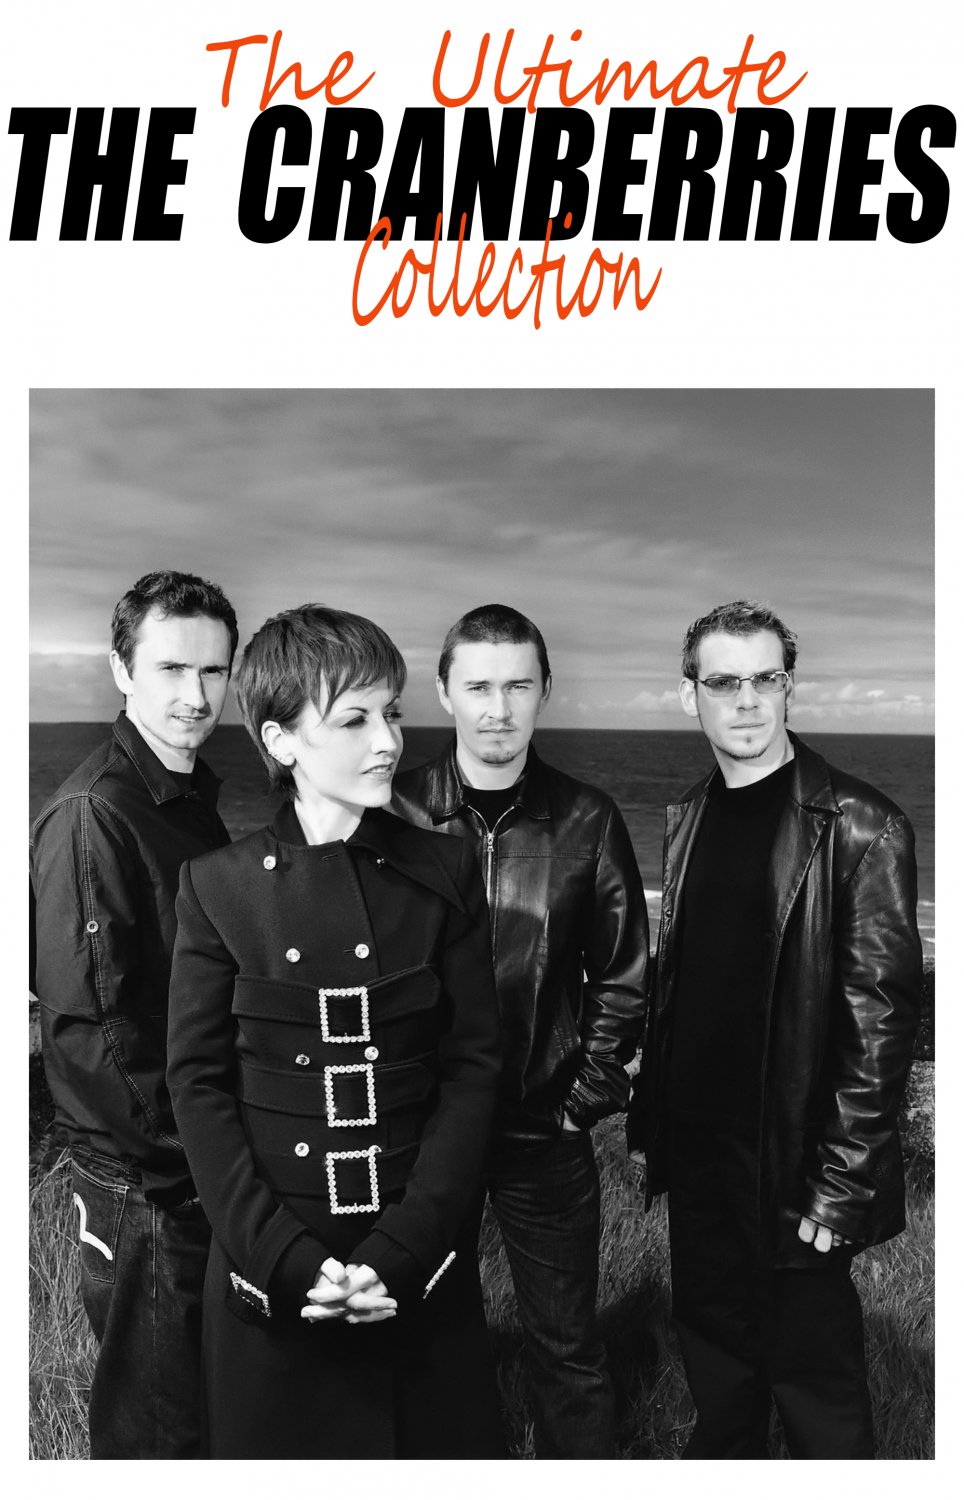 The Cranberries  Dolores O'Riordan  13"x19" (32cm/49cm) Polyester Fabric Poster